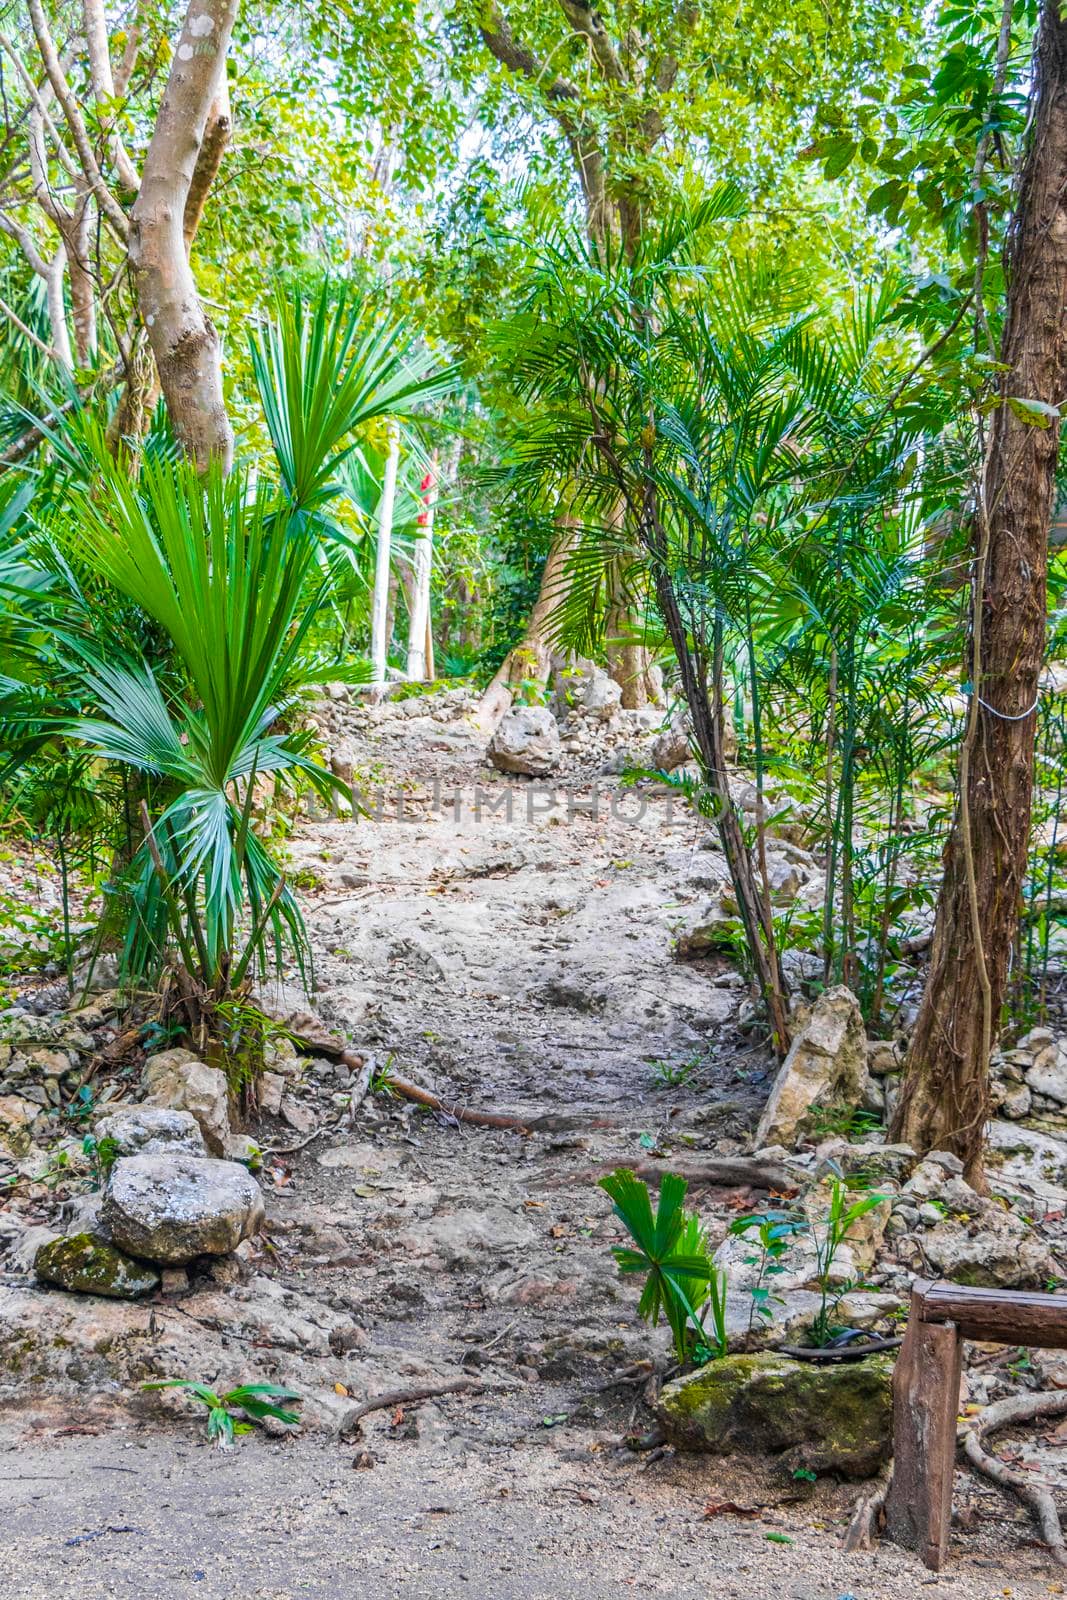 Tropical plants walking path natural jungle forest Puerto Aventuras Mexico. by Arkadij